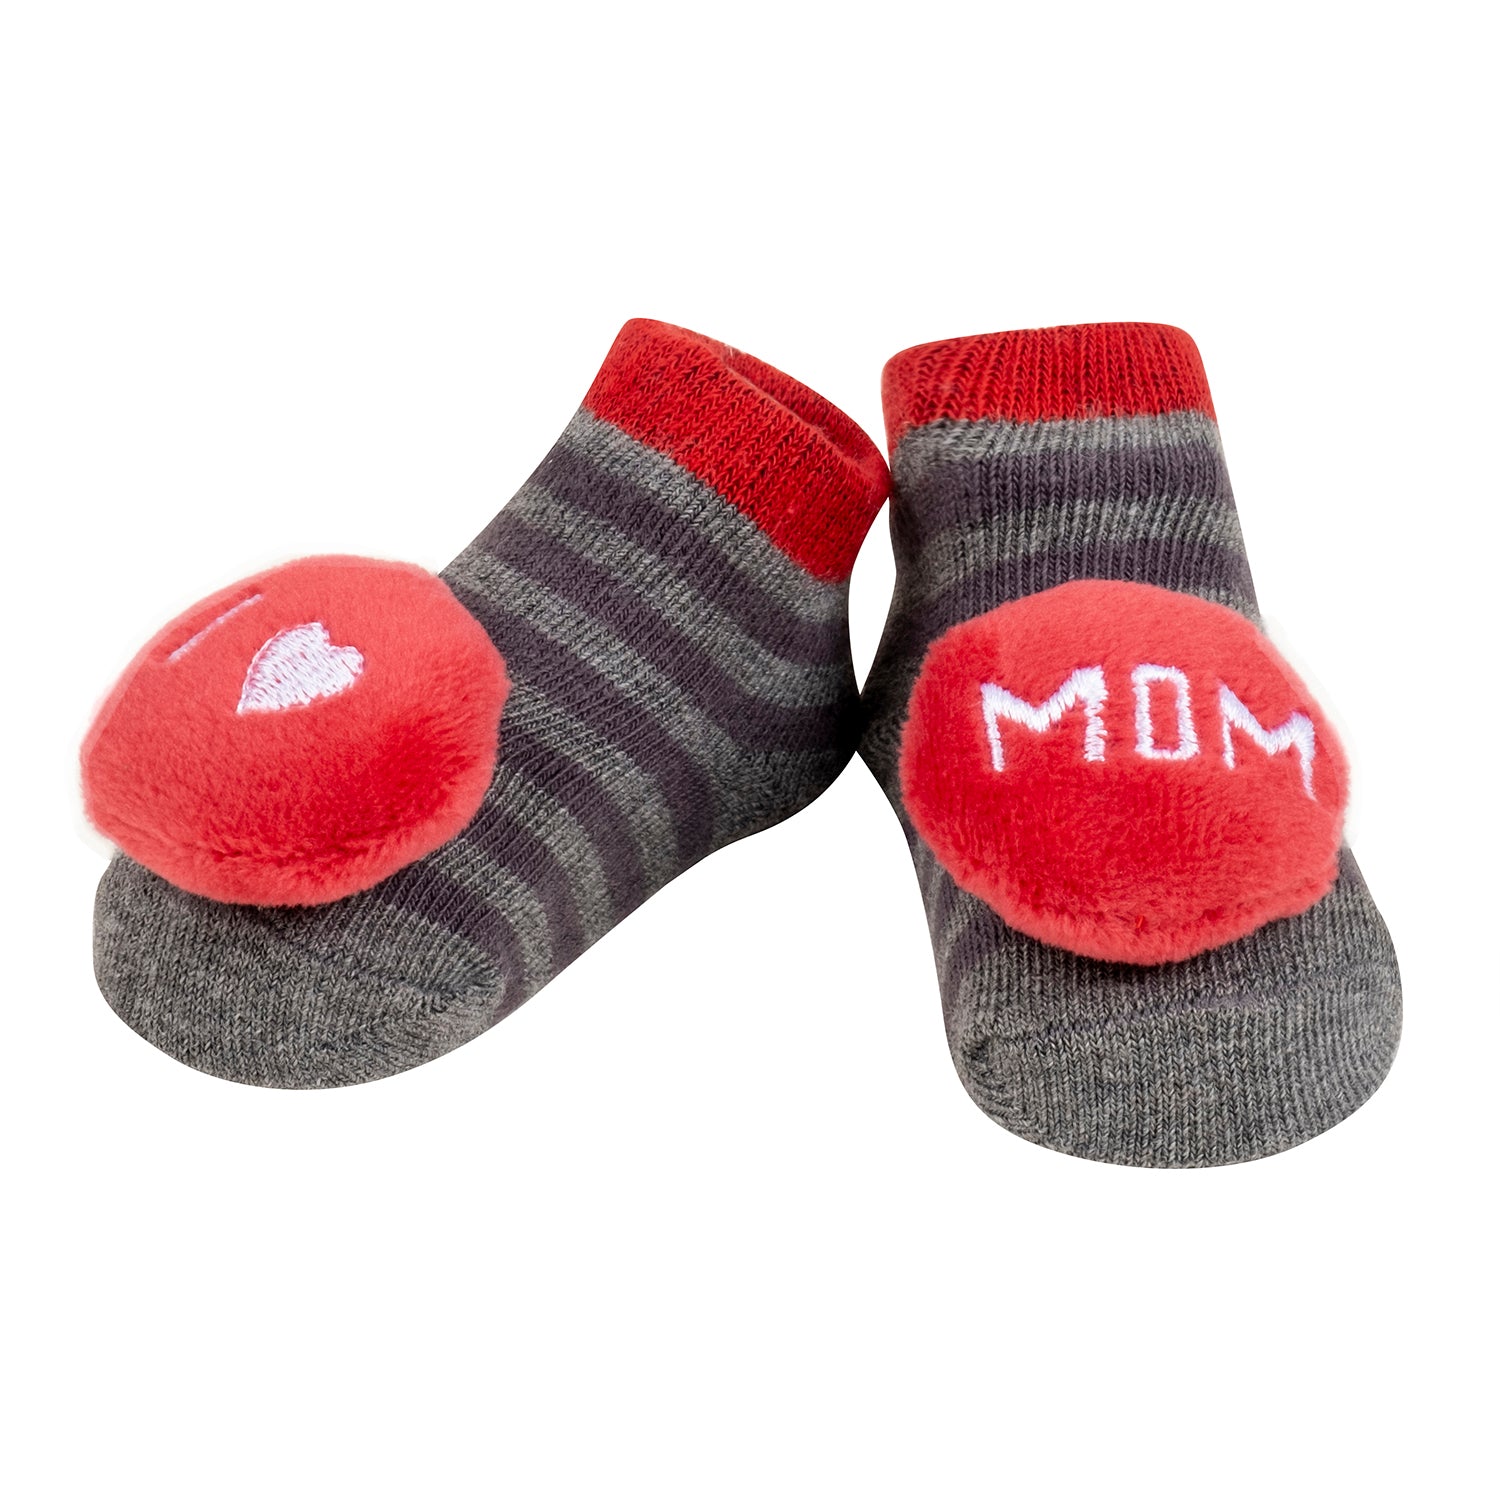 Baby Moo 3D I Love Mom Dad Cotton Ankle Length Fancy Infant Gift Set of 2 Socks Booties - Blue, Red